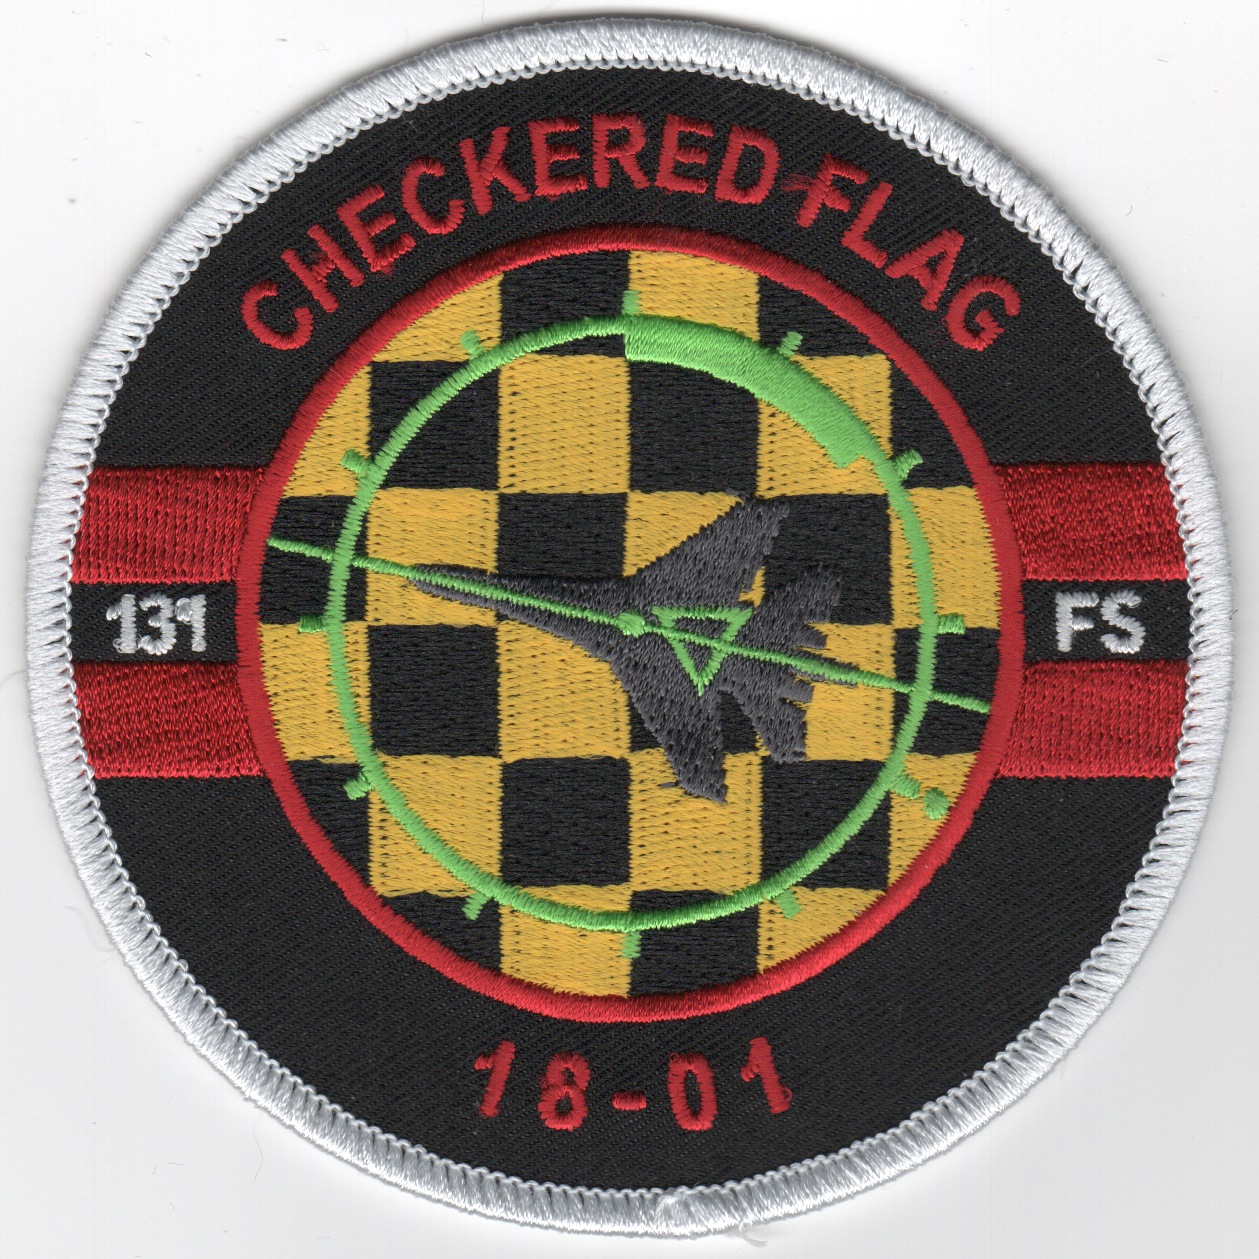 131FS 'Checkered Flag' 18-01 Patch